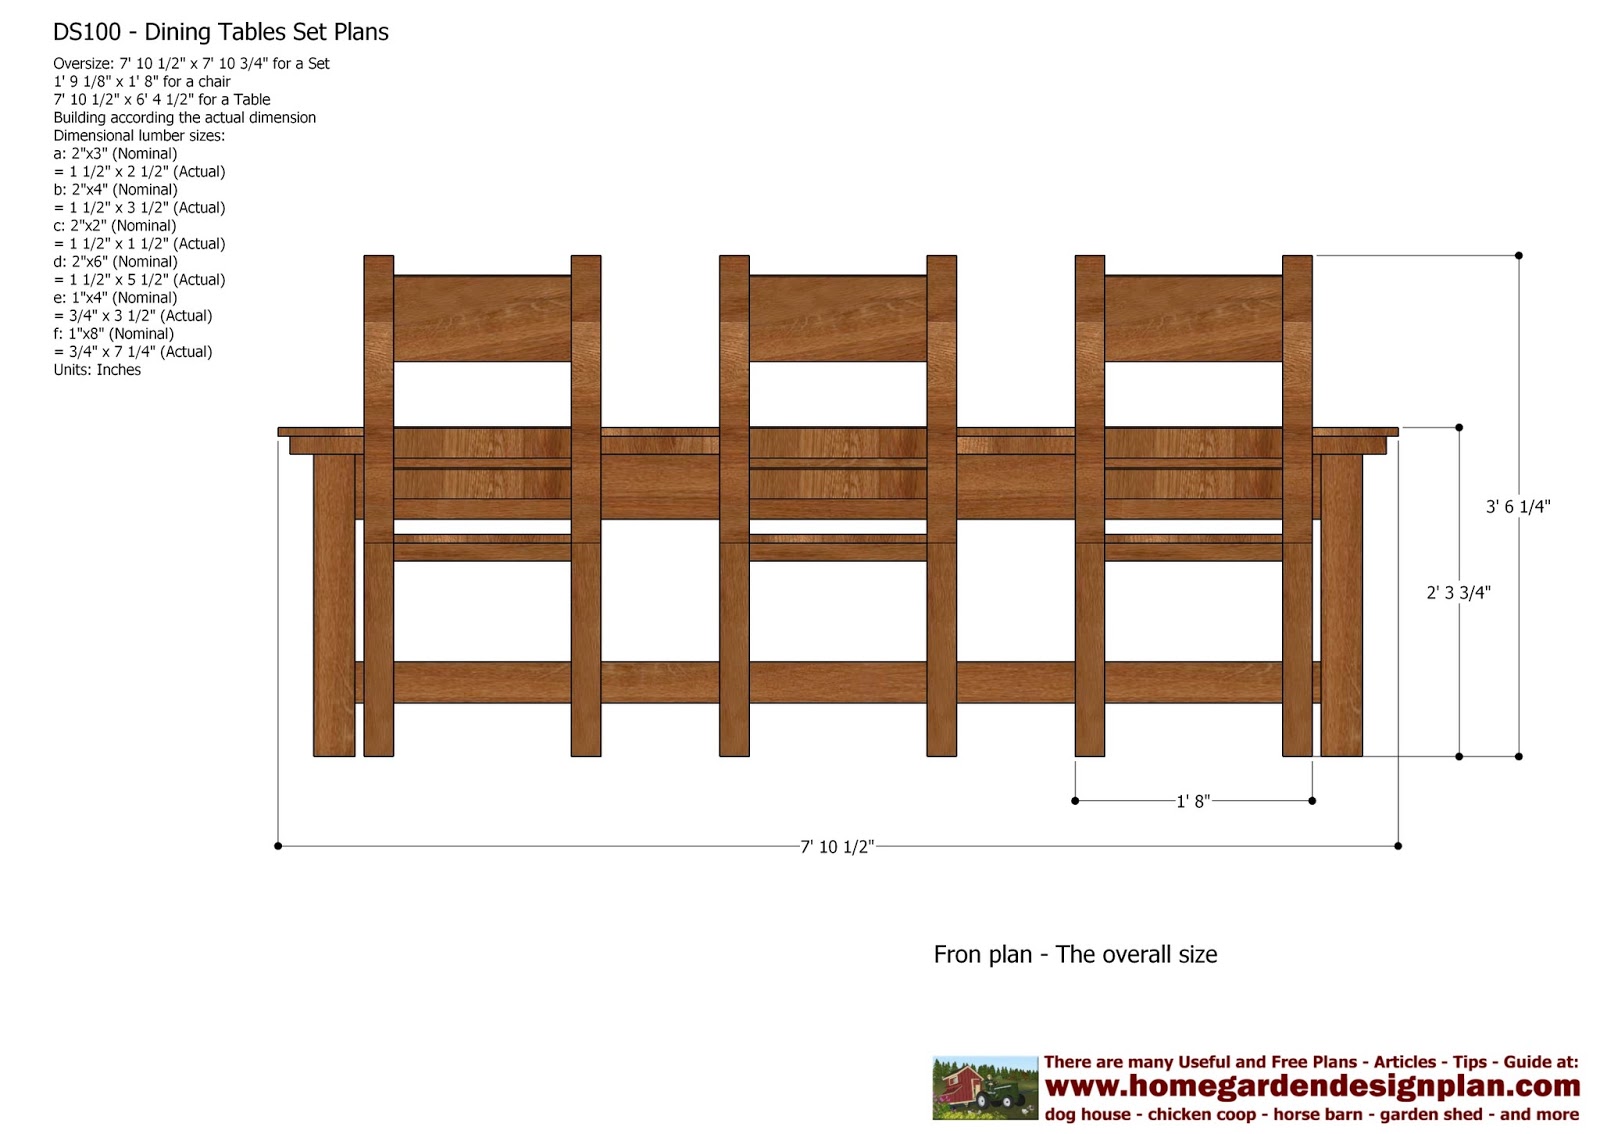 ... Dining Table Set Plans - Woodworking Plans - Outdoor Furniture Plans